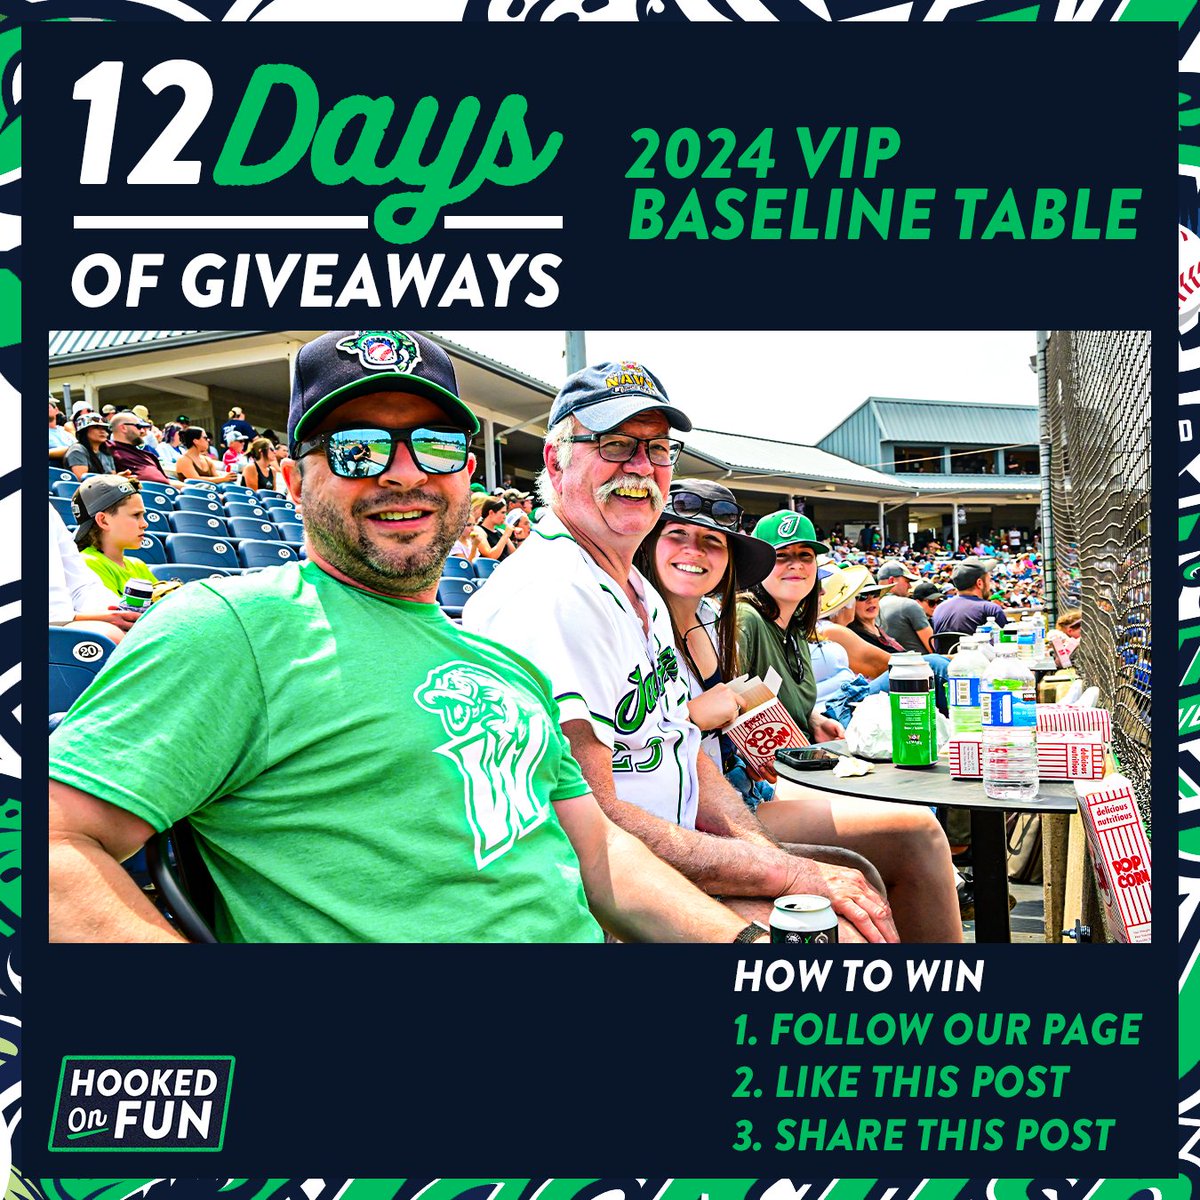 Get that VIP Experience for Christmas! Win a 2024 Baseline VIP Table for a game! Learn More ➡️ bit.ly/4abc0He 1. Follow us 2. Like this post 3. Share this post Winner to be announced at 3pm